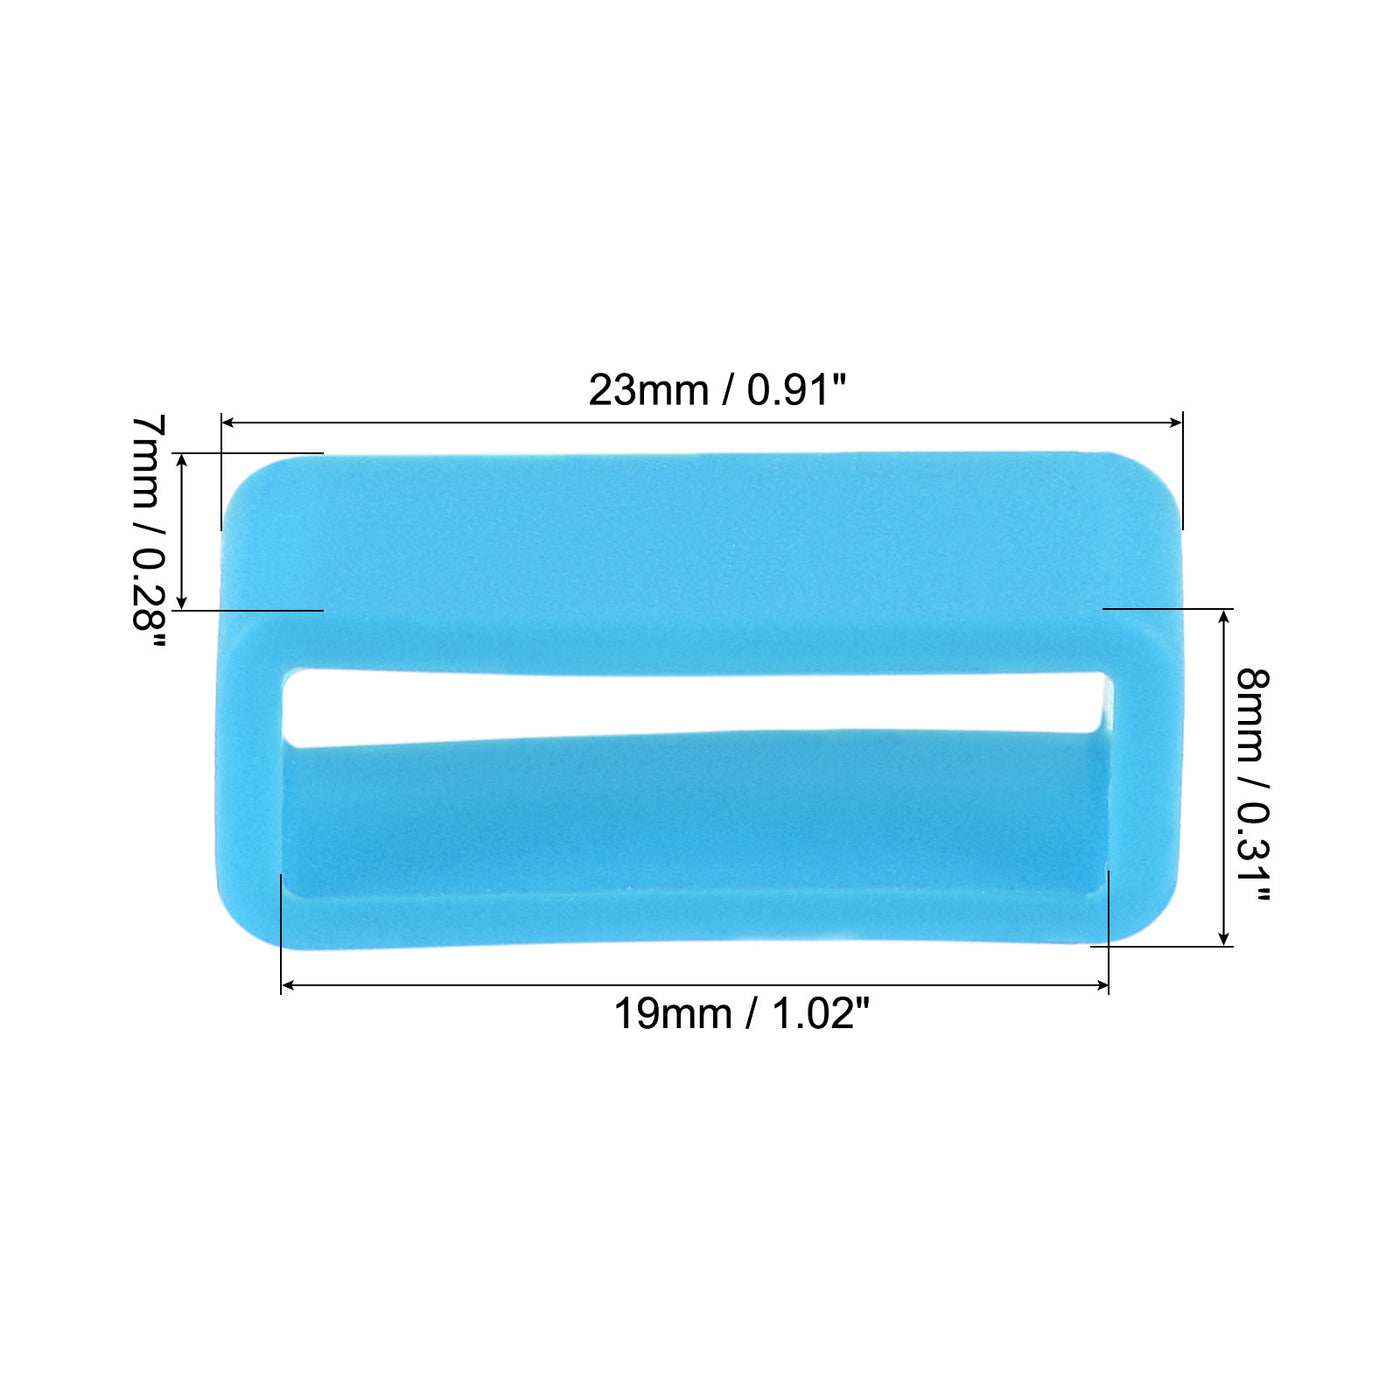 Uxcell Uxcell Watch Band Strap Loops Silicone for 19mm Width Watch Band, Light Blue 4 Pcs